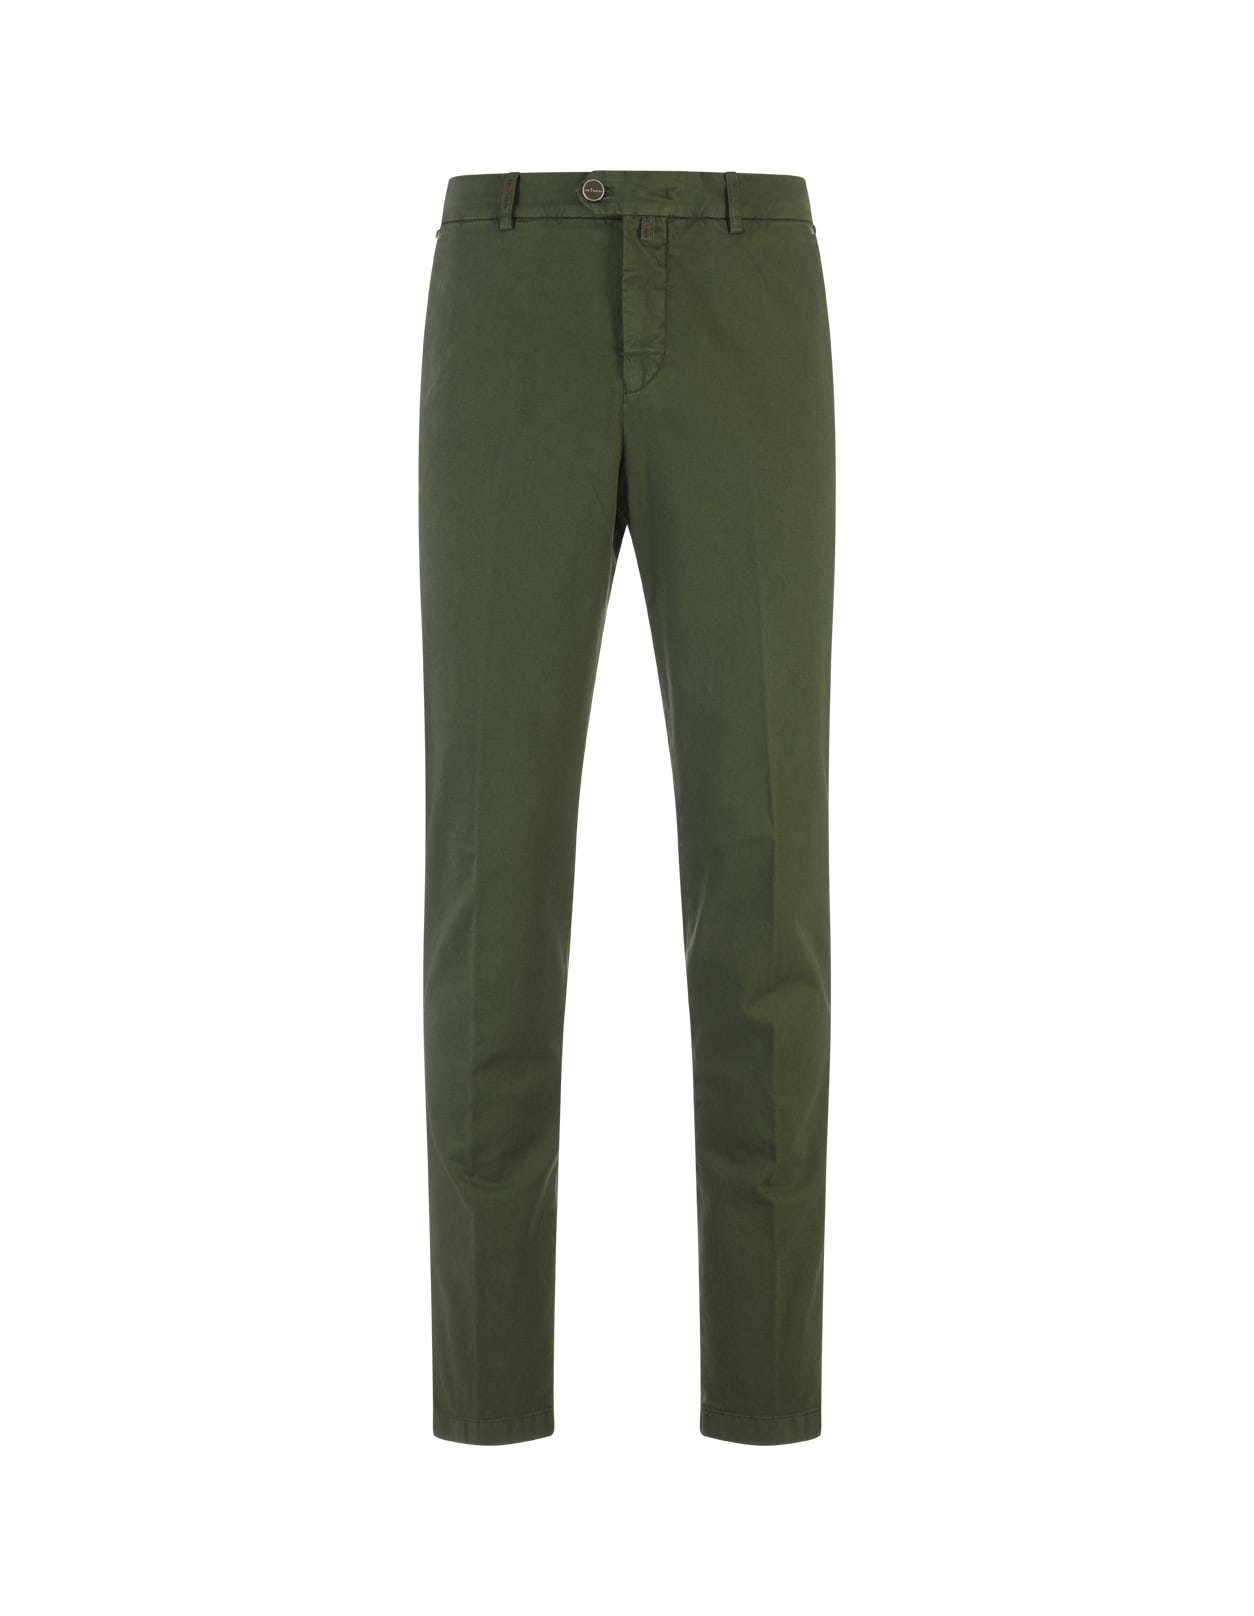 Kiton Olive Green Cotton Slim Fit Trousers